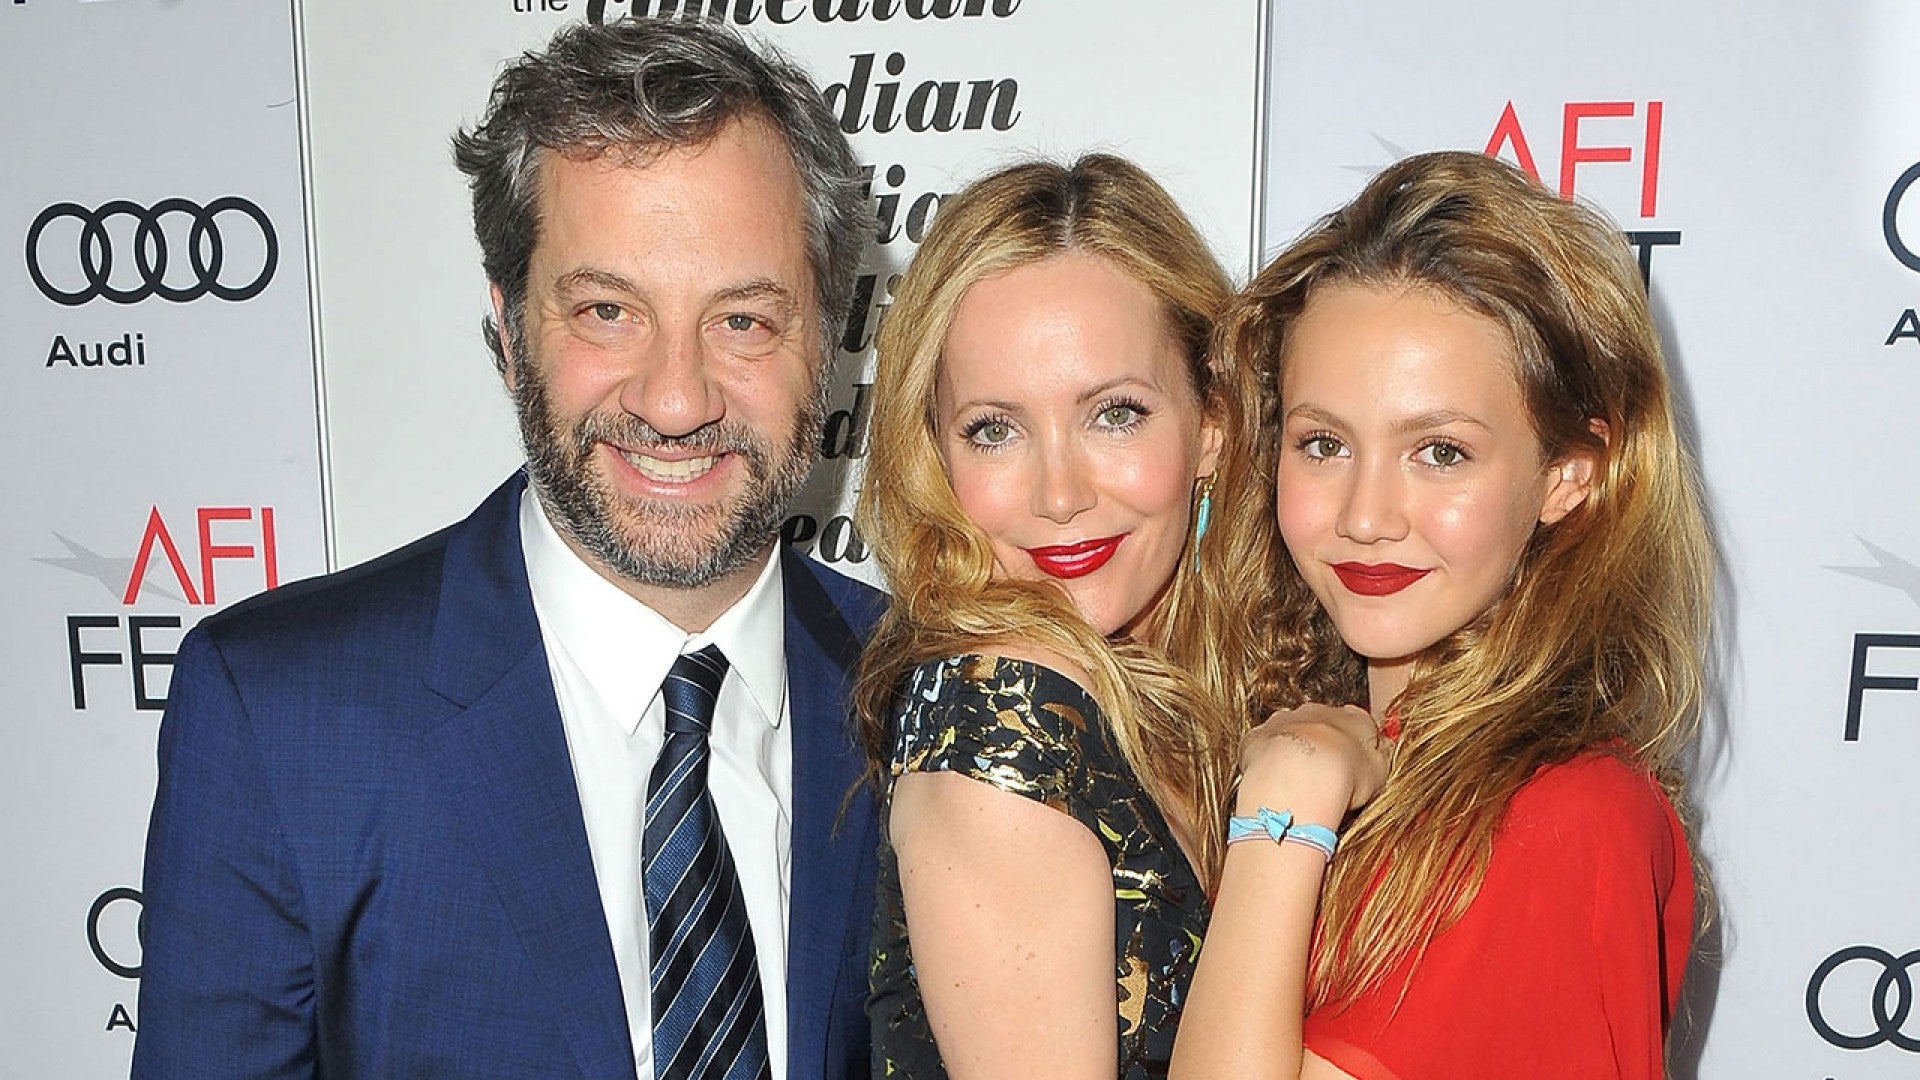 See Judd Apatow and Leslie Mann's Daughter Iris in New Prom Photos